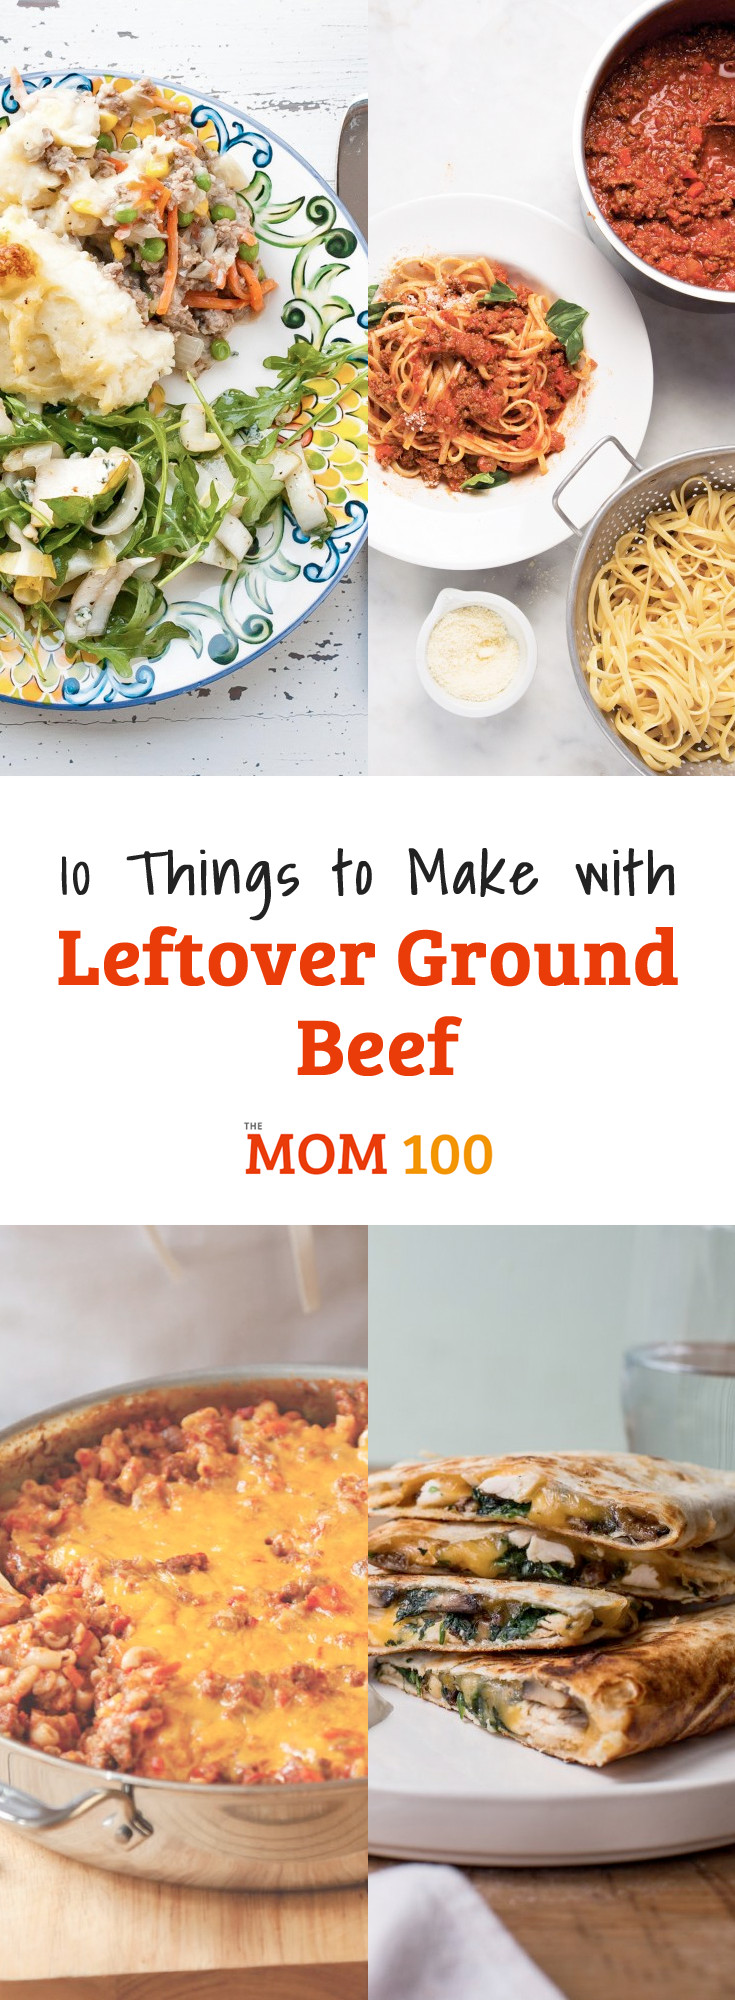 Simple Things To Make With Ground Beef
 10 Things To Make With Leftover Ground Beef